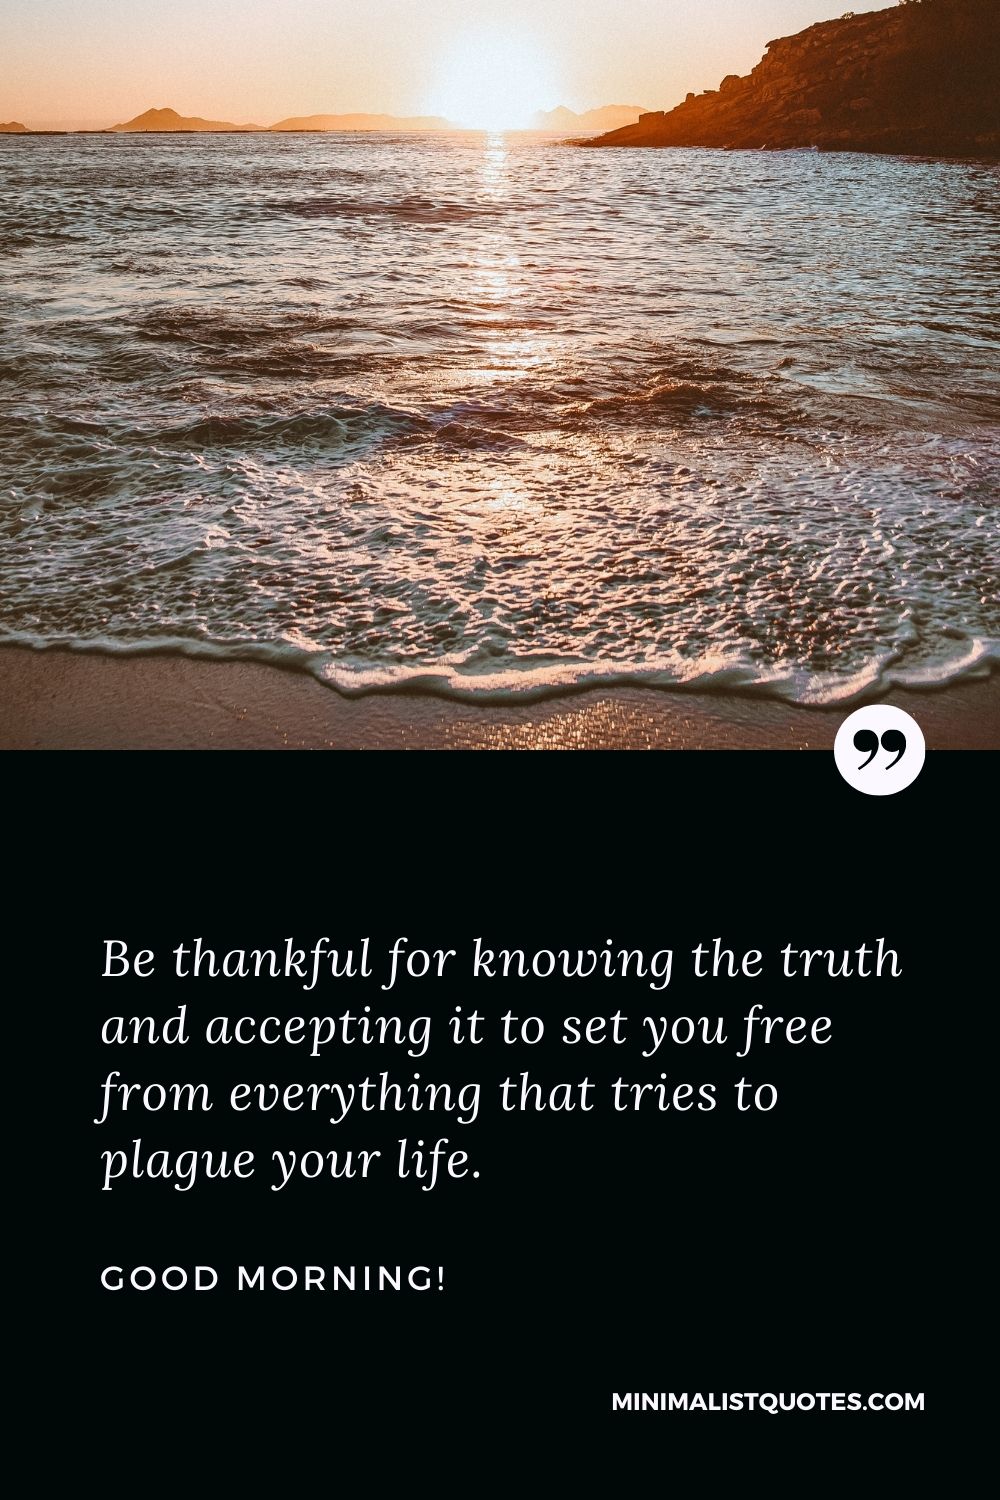 Good Morning Wish & Message With HD Image: Be thankful for knowing the truth and accepting it to set you free from everything that tries to plague your life.